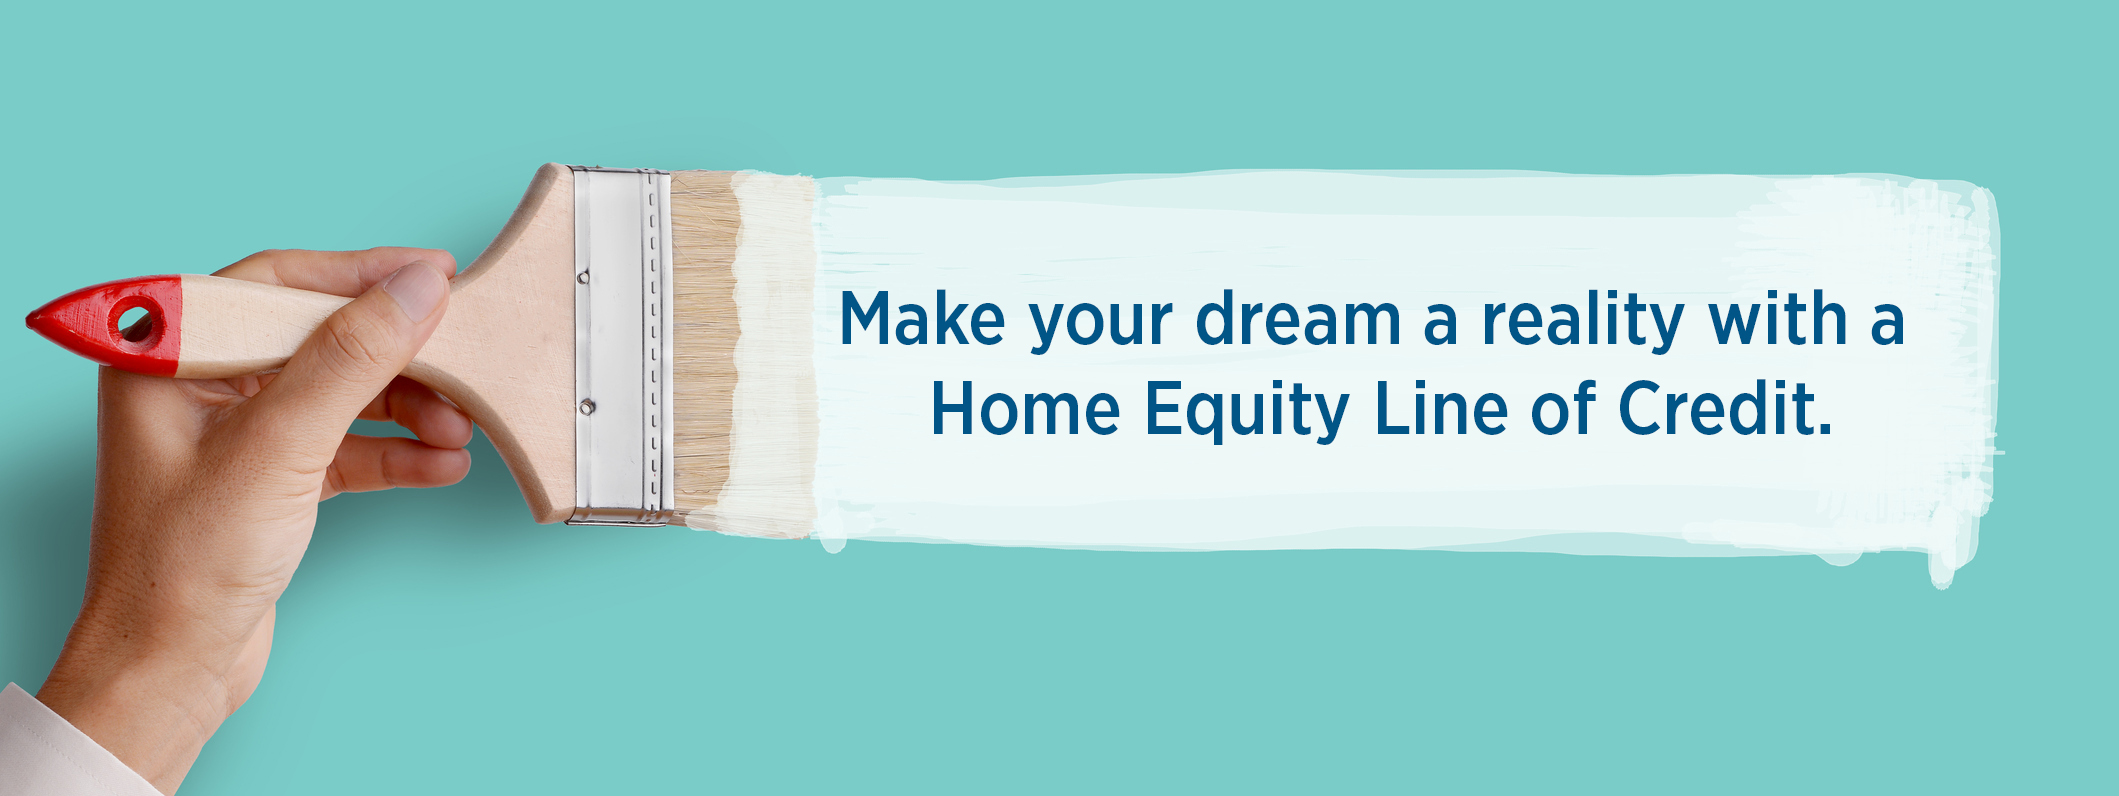 home-equity-line-of-credit-camden-national-bank